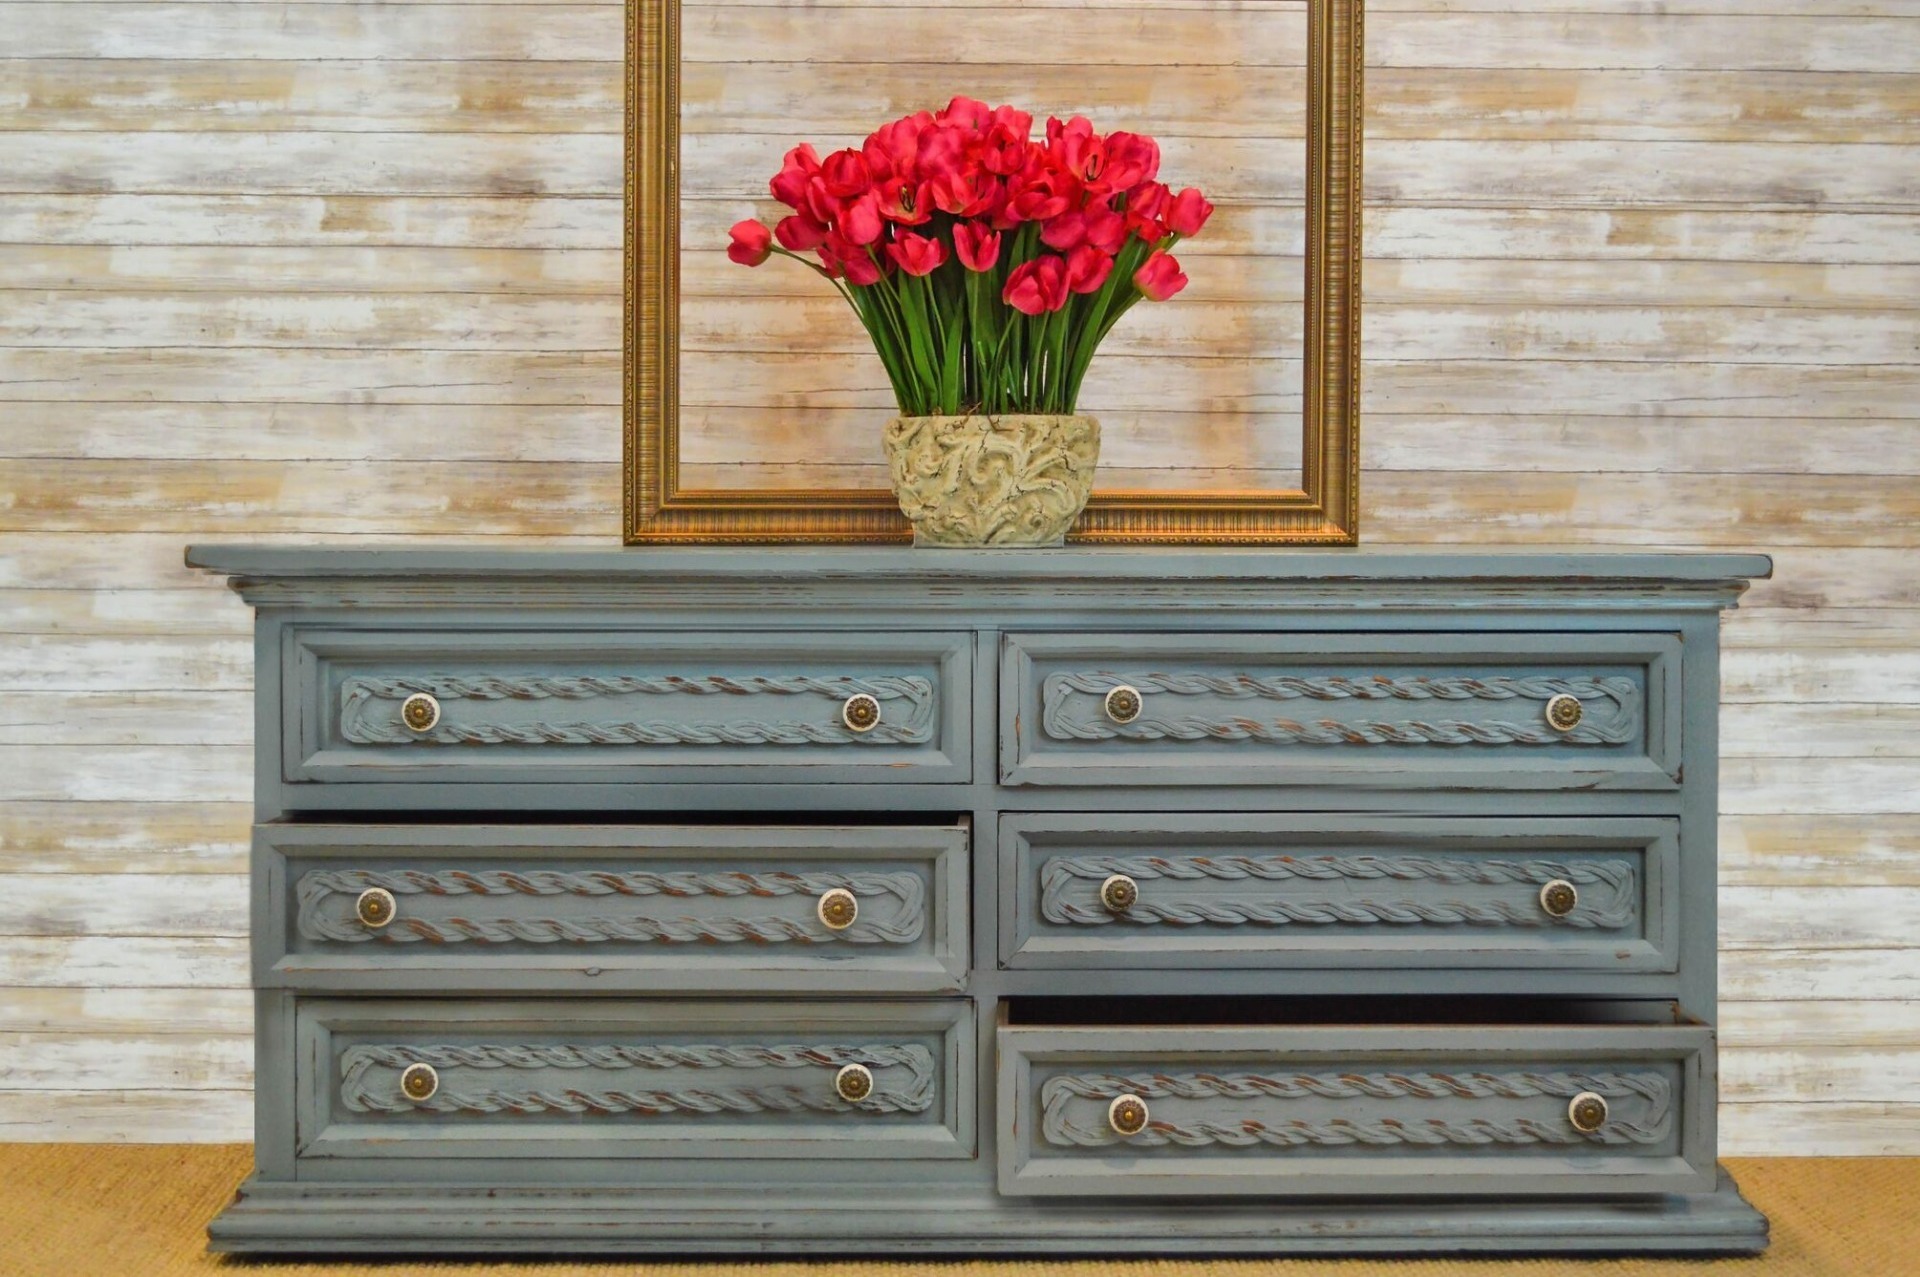 Recycled 6 Drawer Sideboard offered for sale from Naples Canvas and Upholstery.